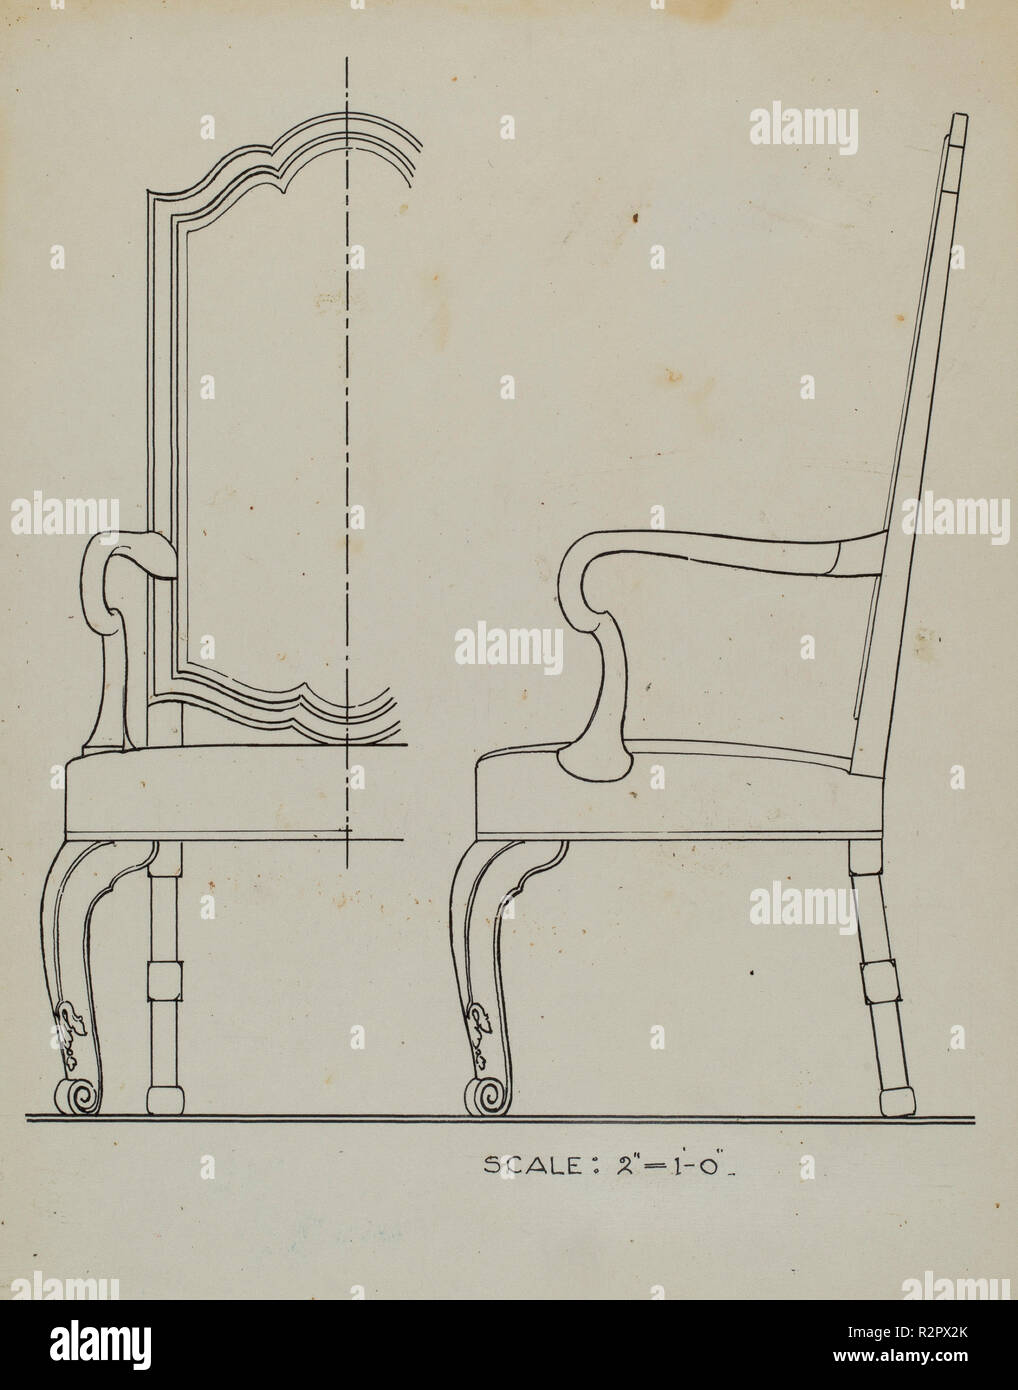 Walnut Armchair. Dated: c. 1936. Dimensions: overall: 25.4 x 19.3 cm (10 x 7 5/8 in.)  Original IAD Object: none given. Medium: pen and ink on paper. Museum: National Gallery of Art, Washington DC. Author: Simon Weiss. Stock Photo